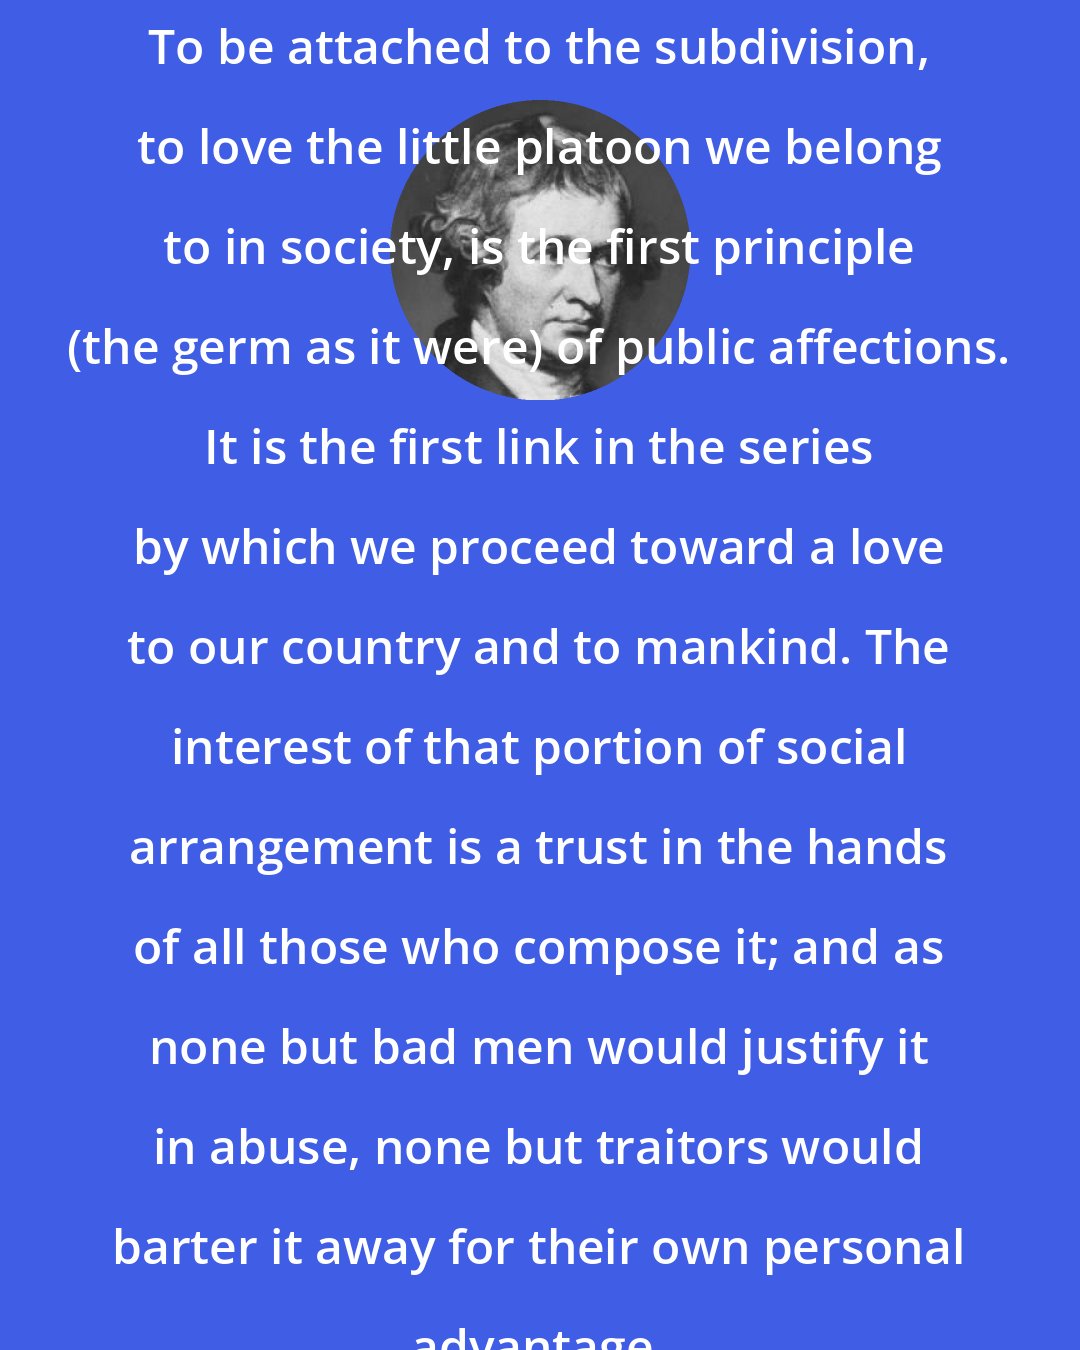 Edmund Burke: To be attached to the subdivision, to love the little platoon we belong to in society, is the first principle (the germ as it were) of public affections. It is the first link in the series by which we proceed toward a love to our country and to mankind. The interest of that portion of social arrangement is a trust in the hands of all those who compose it; and as none but bad men would justify it in abuse, none but traitors would barter it away for their own personal advantage.